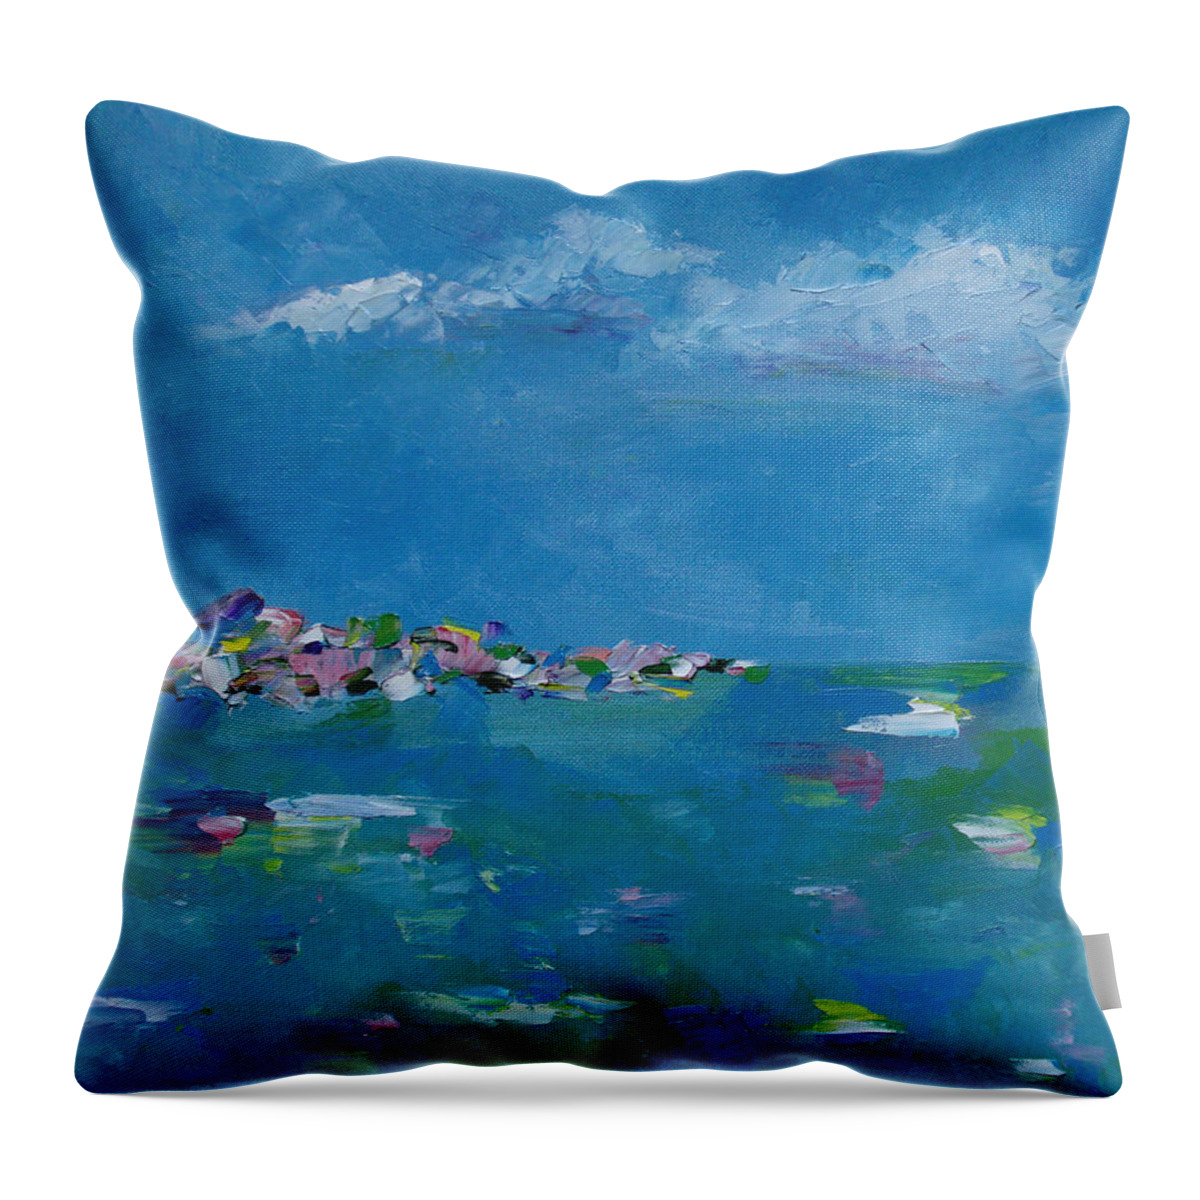 Abstract Throw Pillow featuring the painting Ocean Delight by Judith Rhue